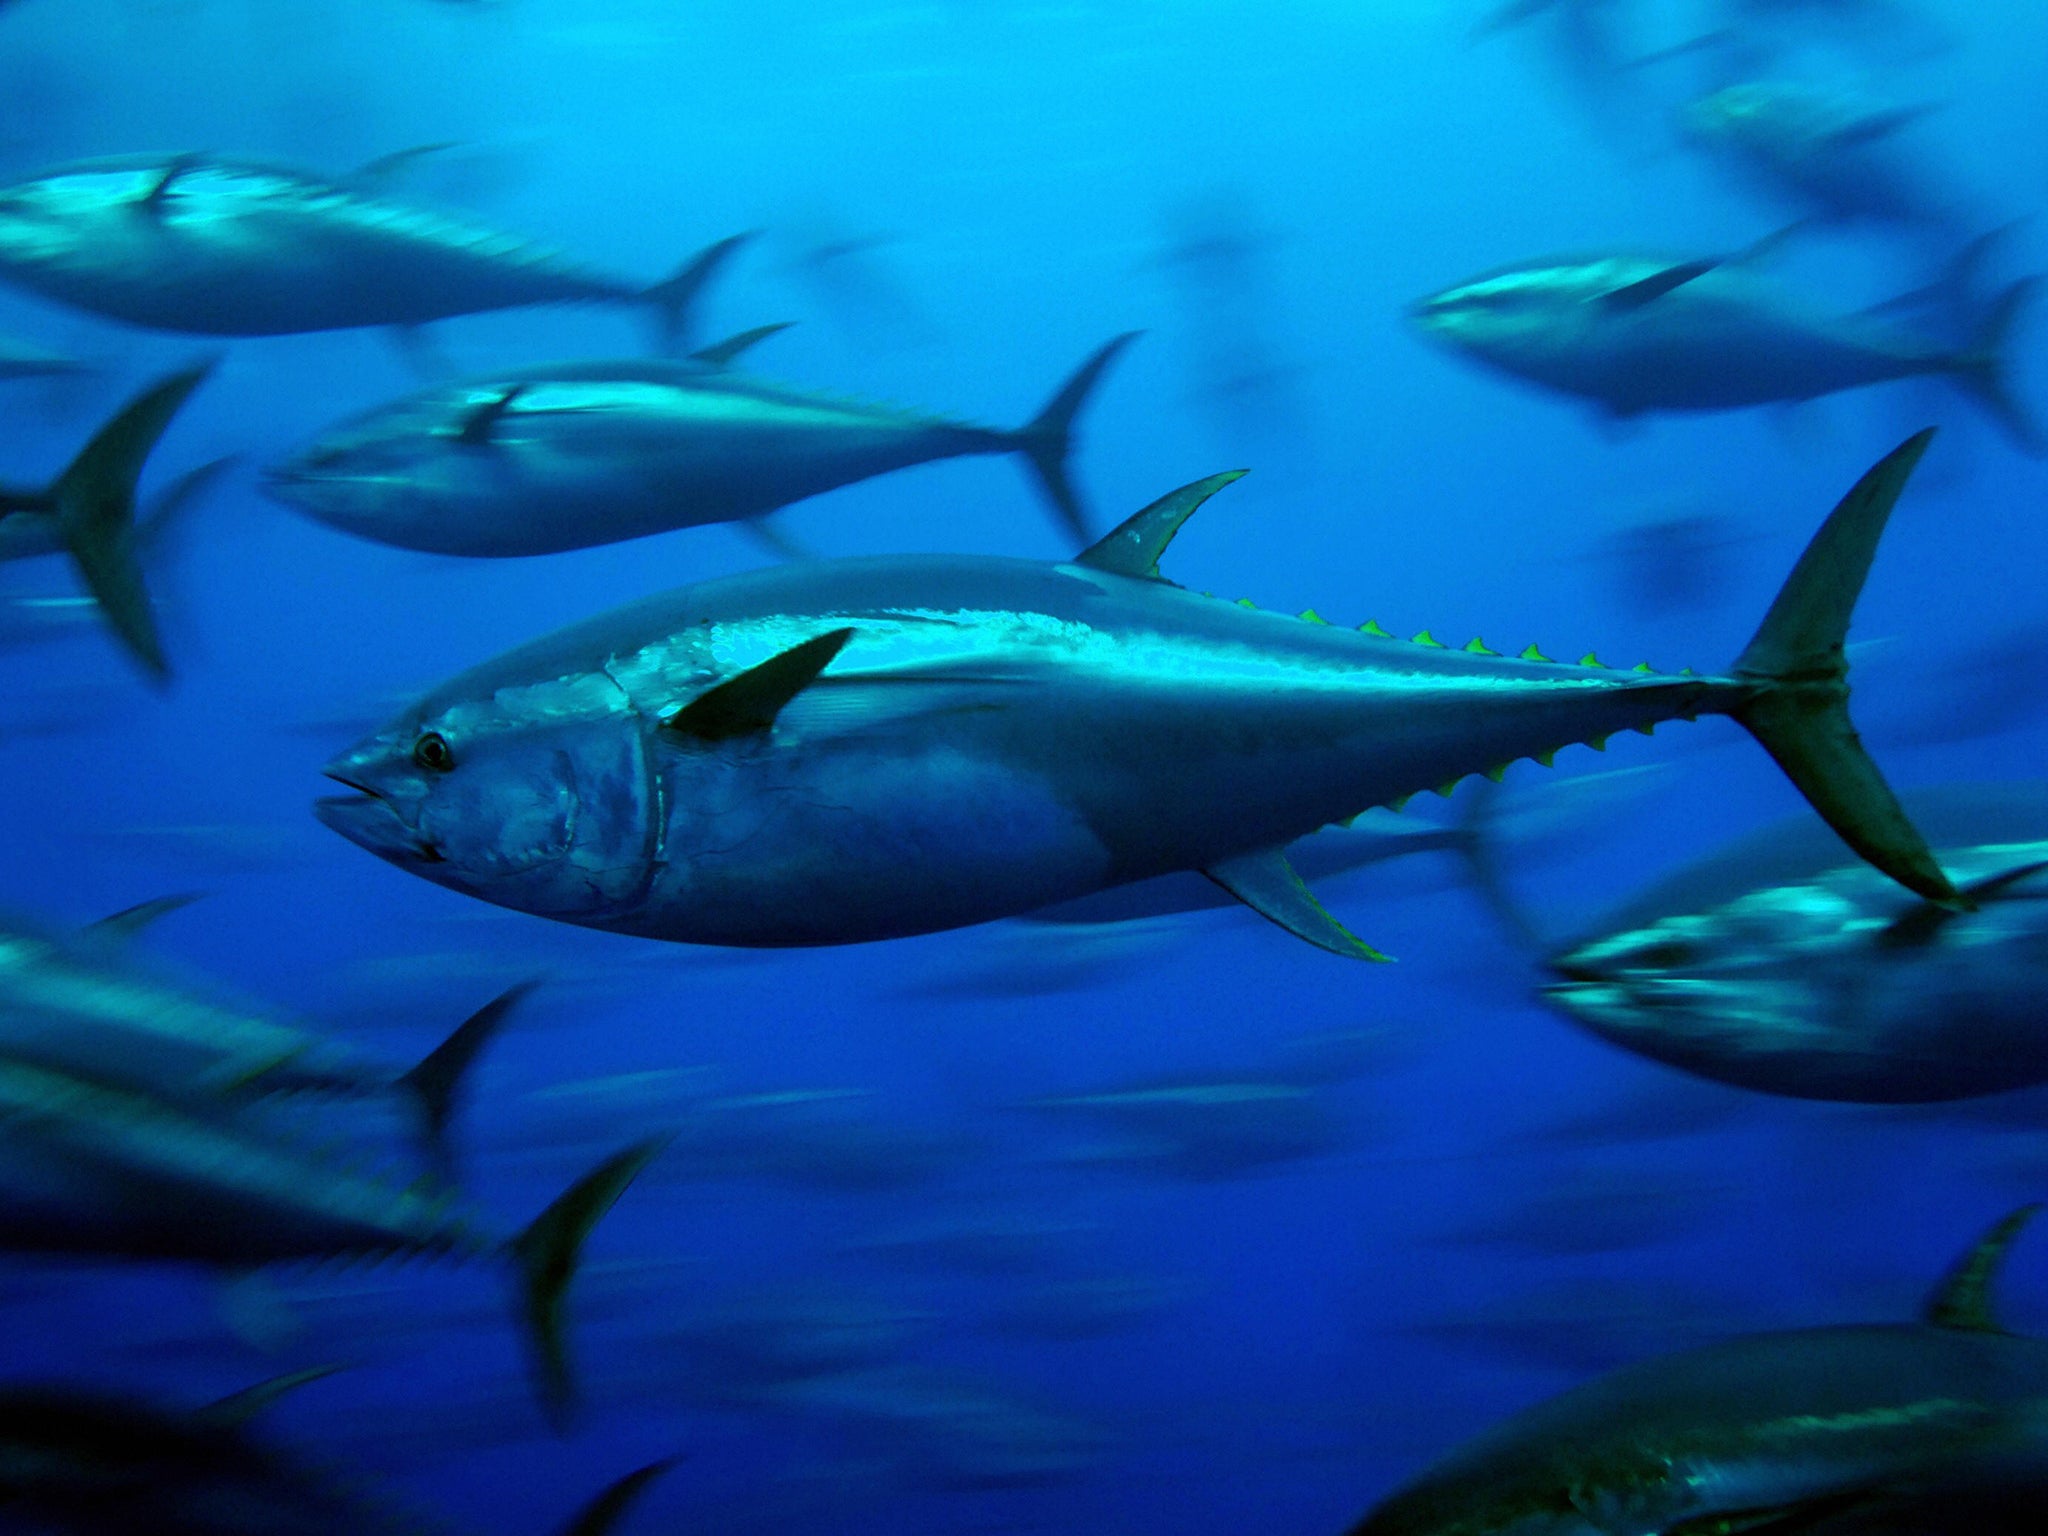 The numbers of bluefin tuna are rising – but consumers
are still advised not to eat them